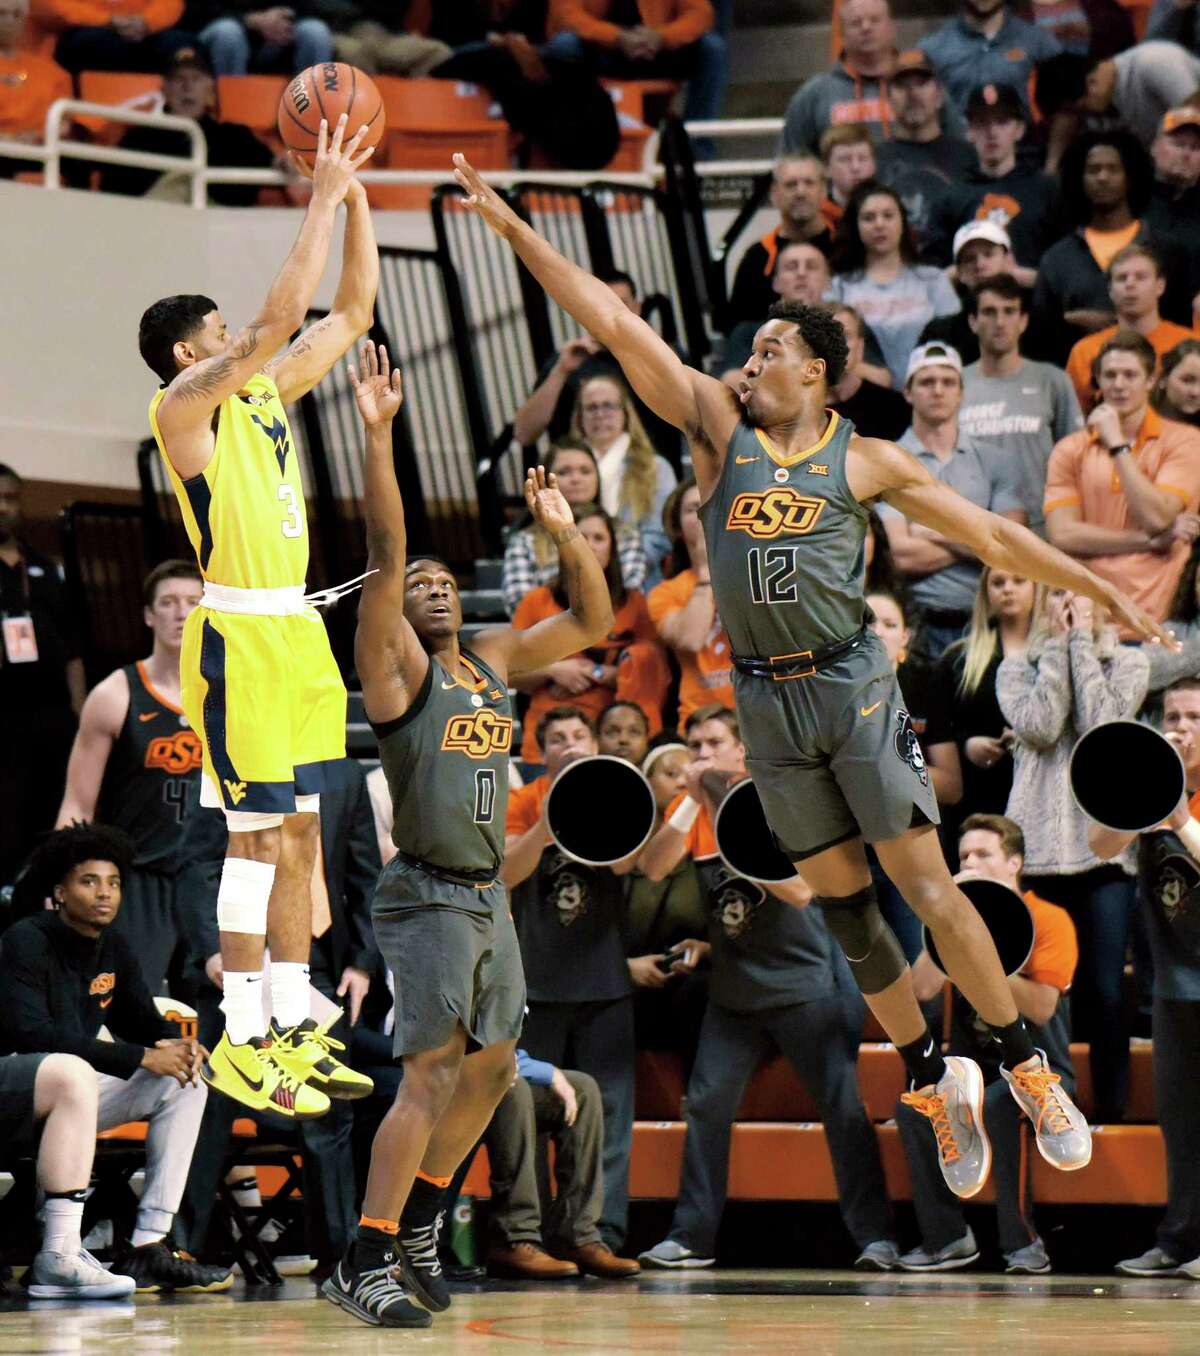 West Virginia guard James Bolden (3) takes a shot at the basket over Oklahoma State defenders guard Brandon Averette (0) and forward Cameron McGriff (12) in the first half of an NCAA college basketball game in Stillwater, Okla., Friday, Dec. 29, 2017. (AP Photo/Brody Schmidt)